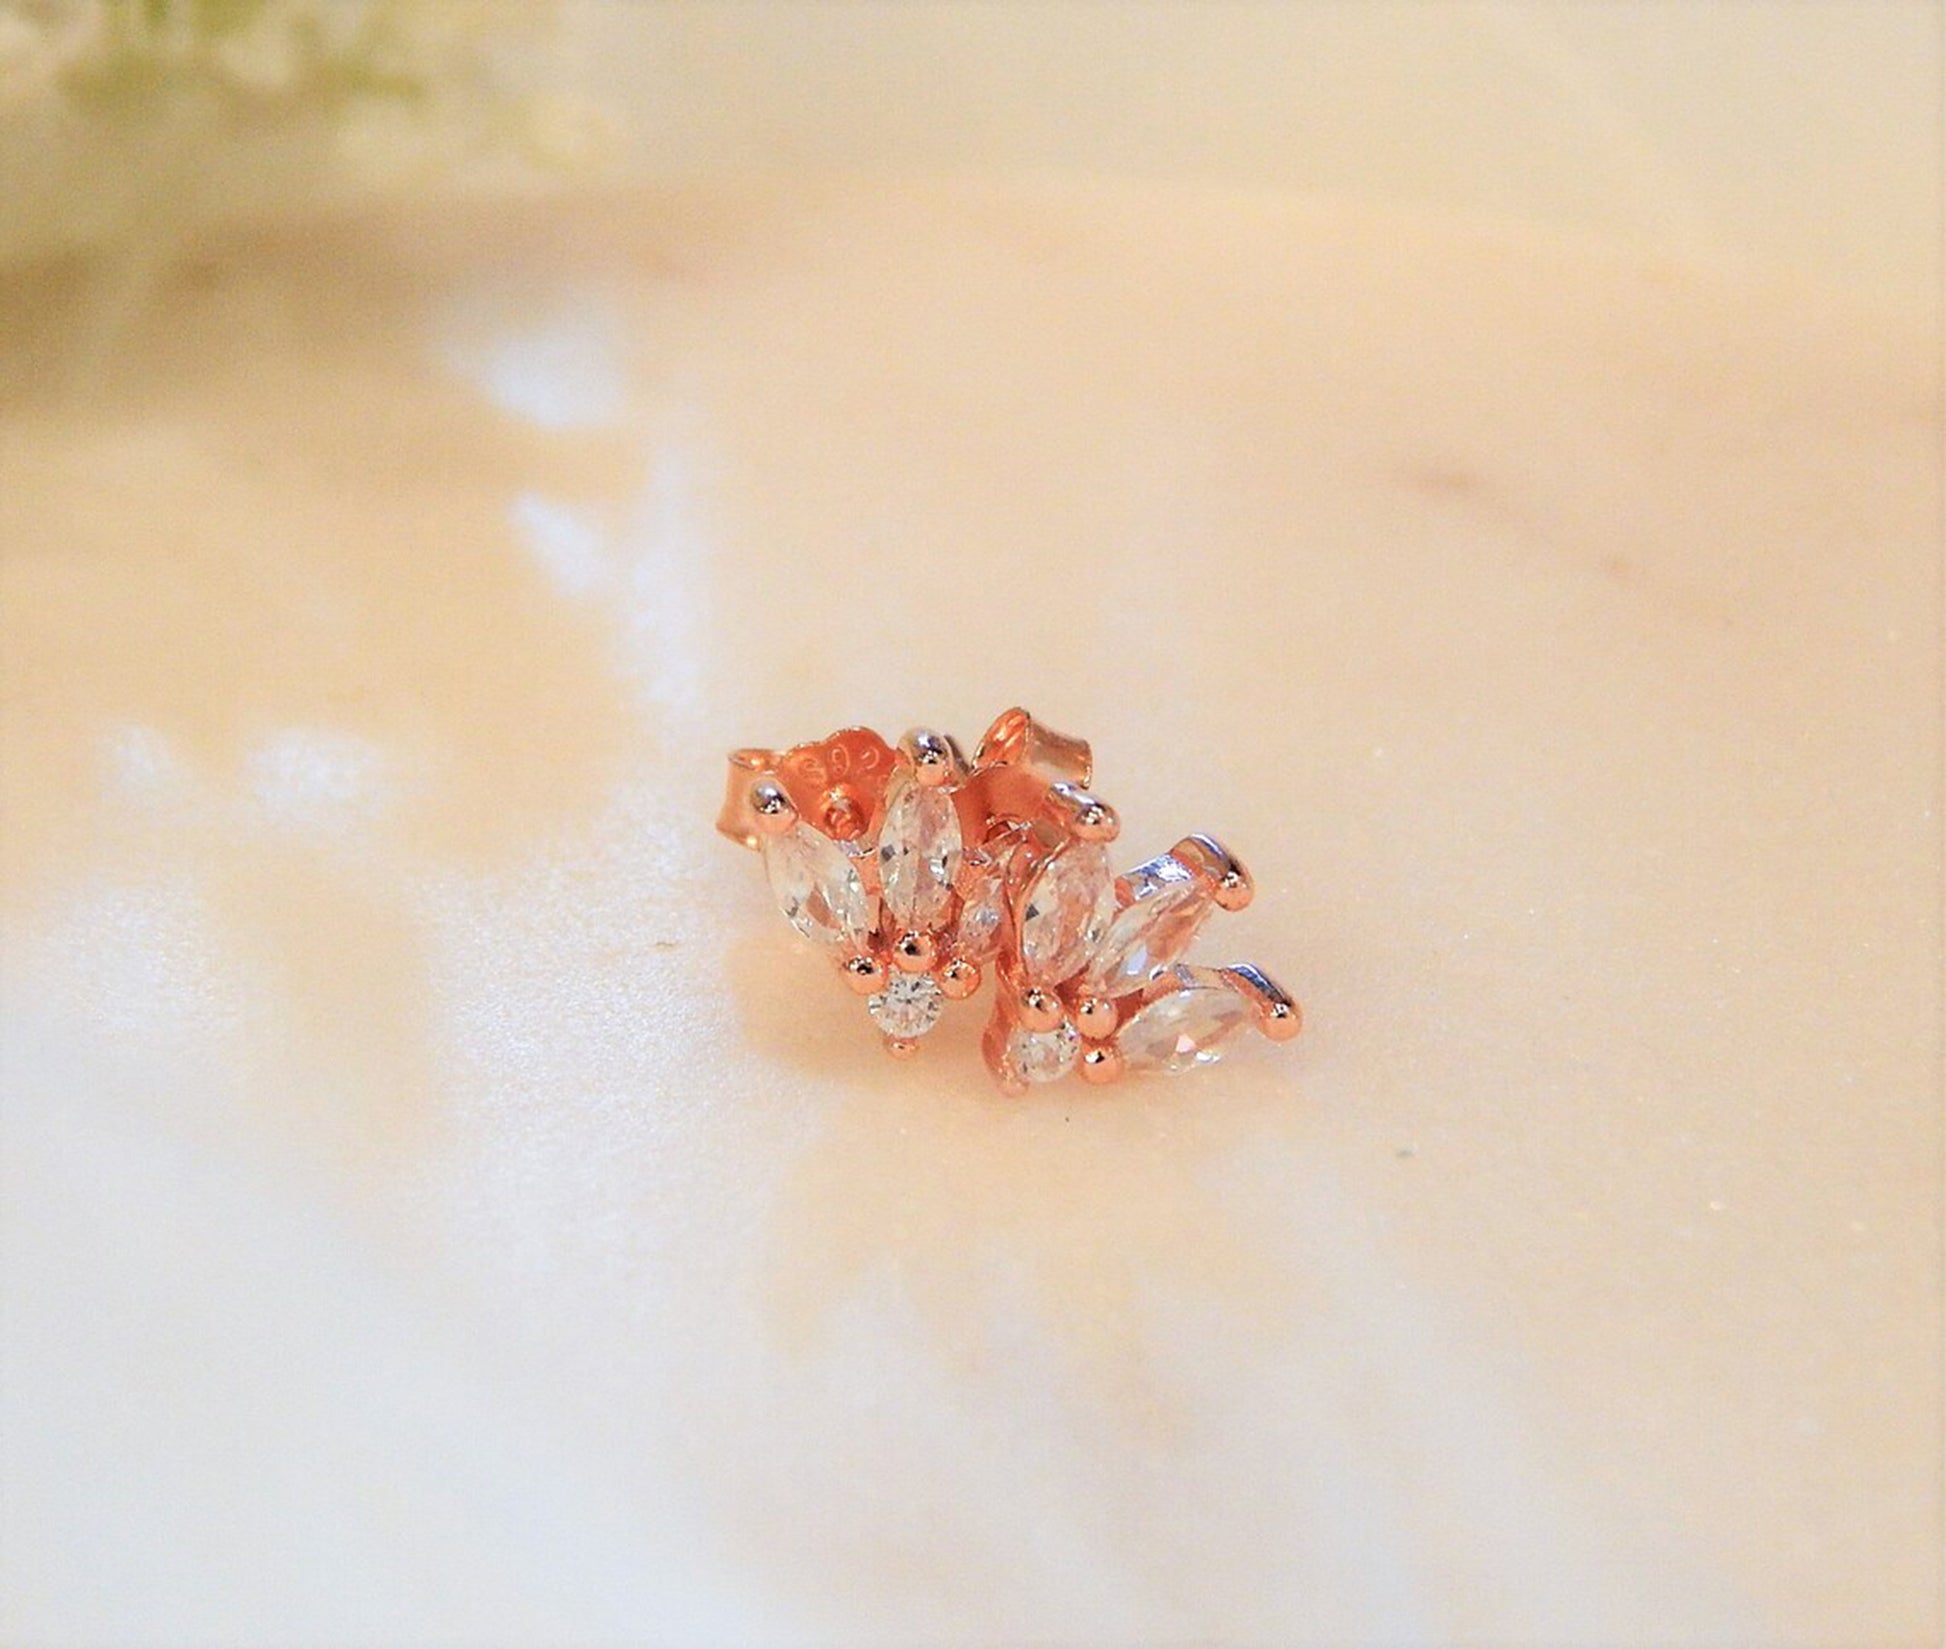 Rose gold diamond earrings are laying on a simple blurry background.